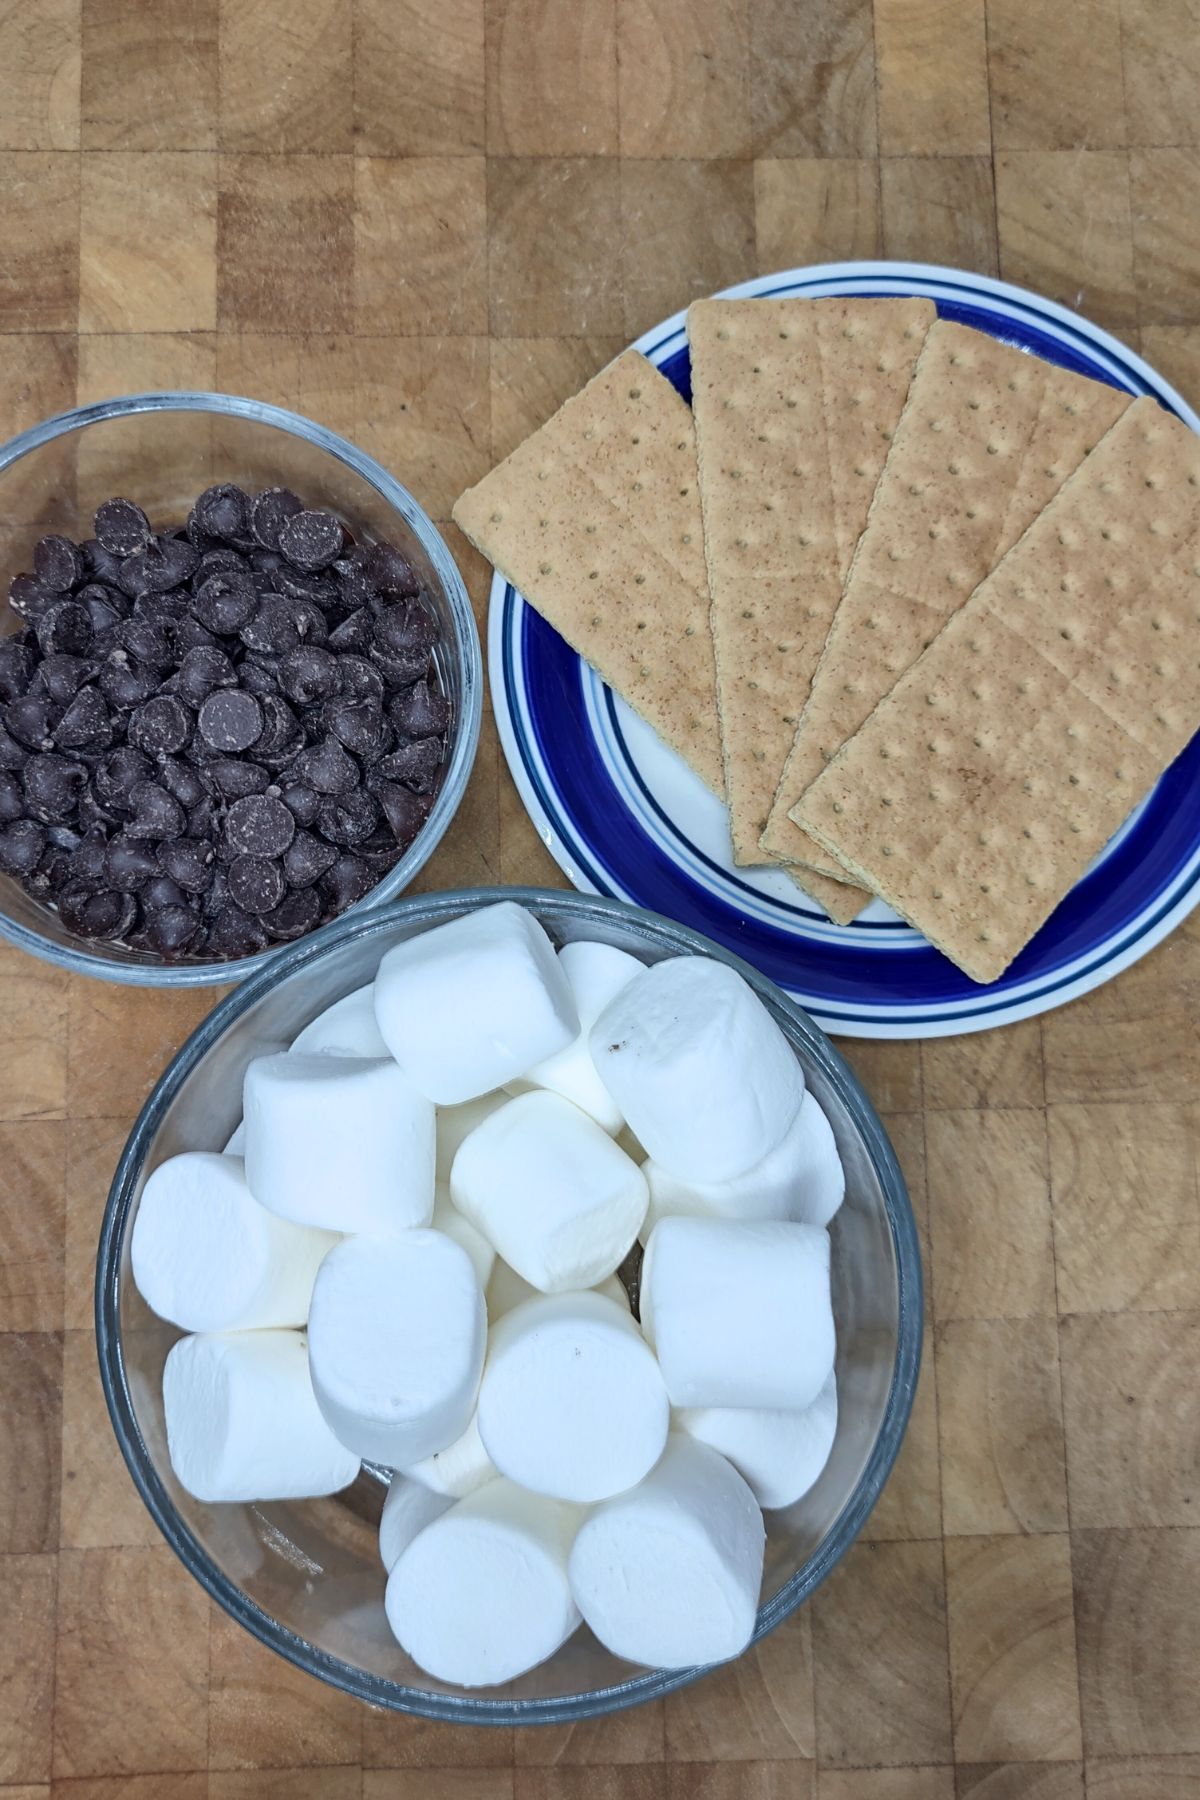 Bowls of chocolate chips, marshmallows and a plate of graham crackers.